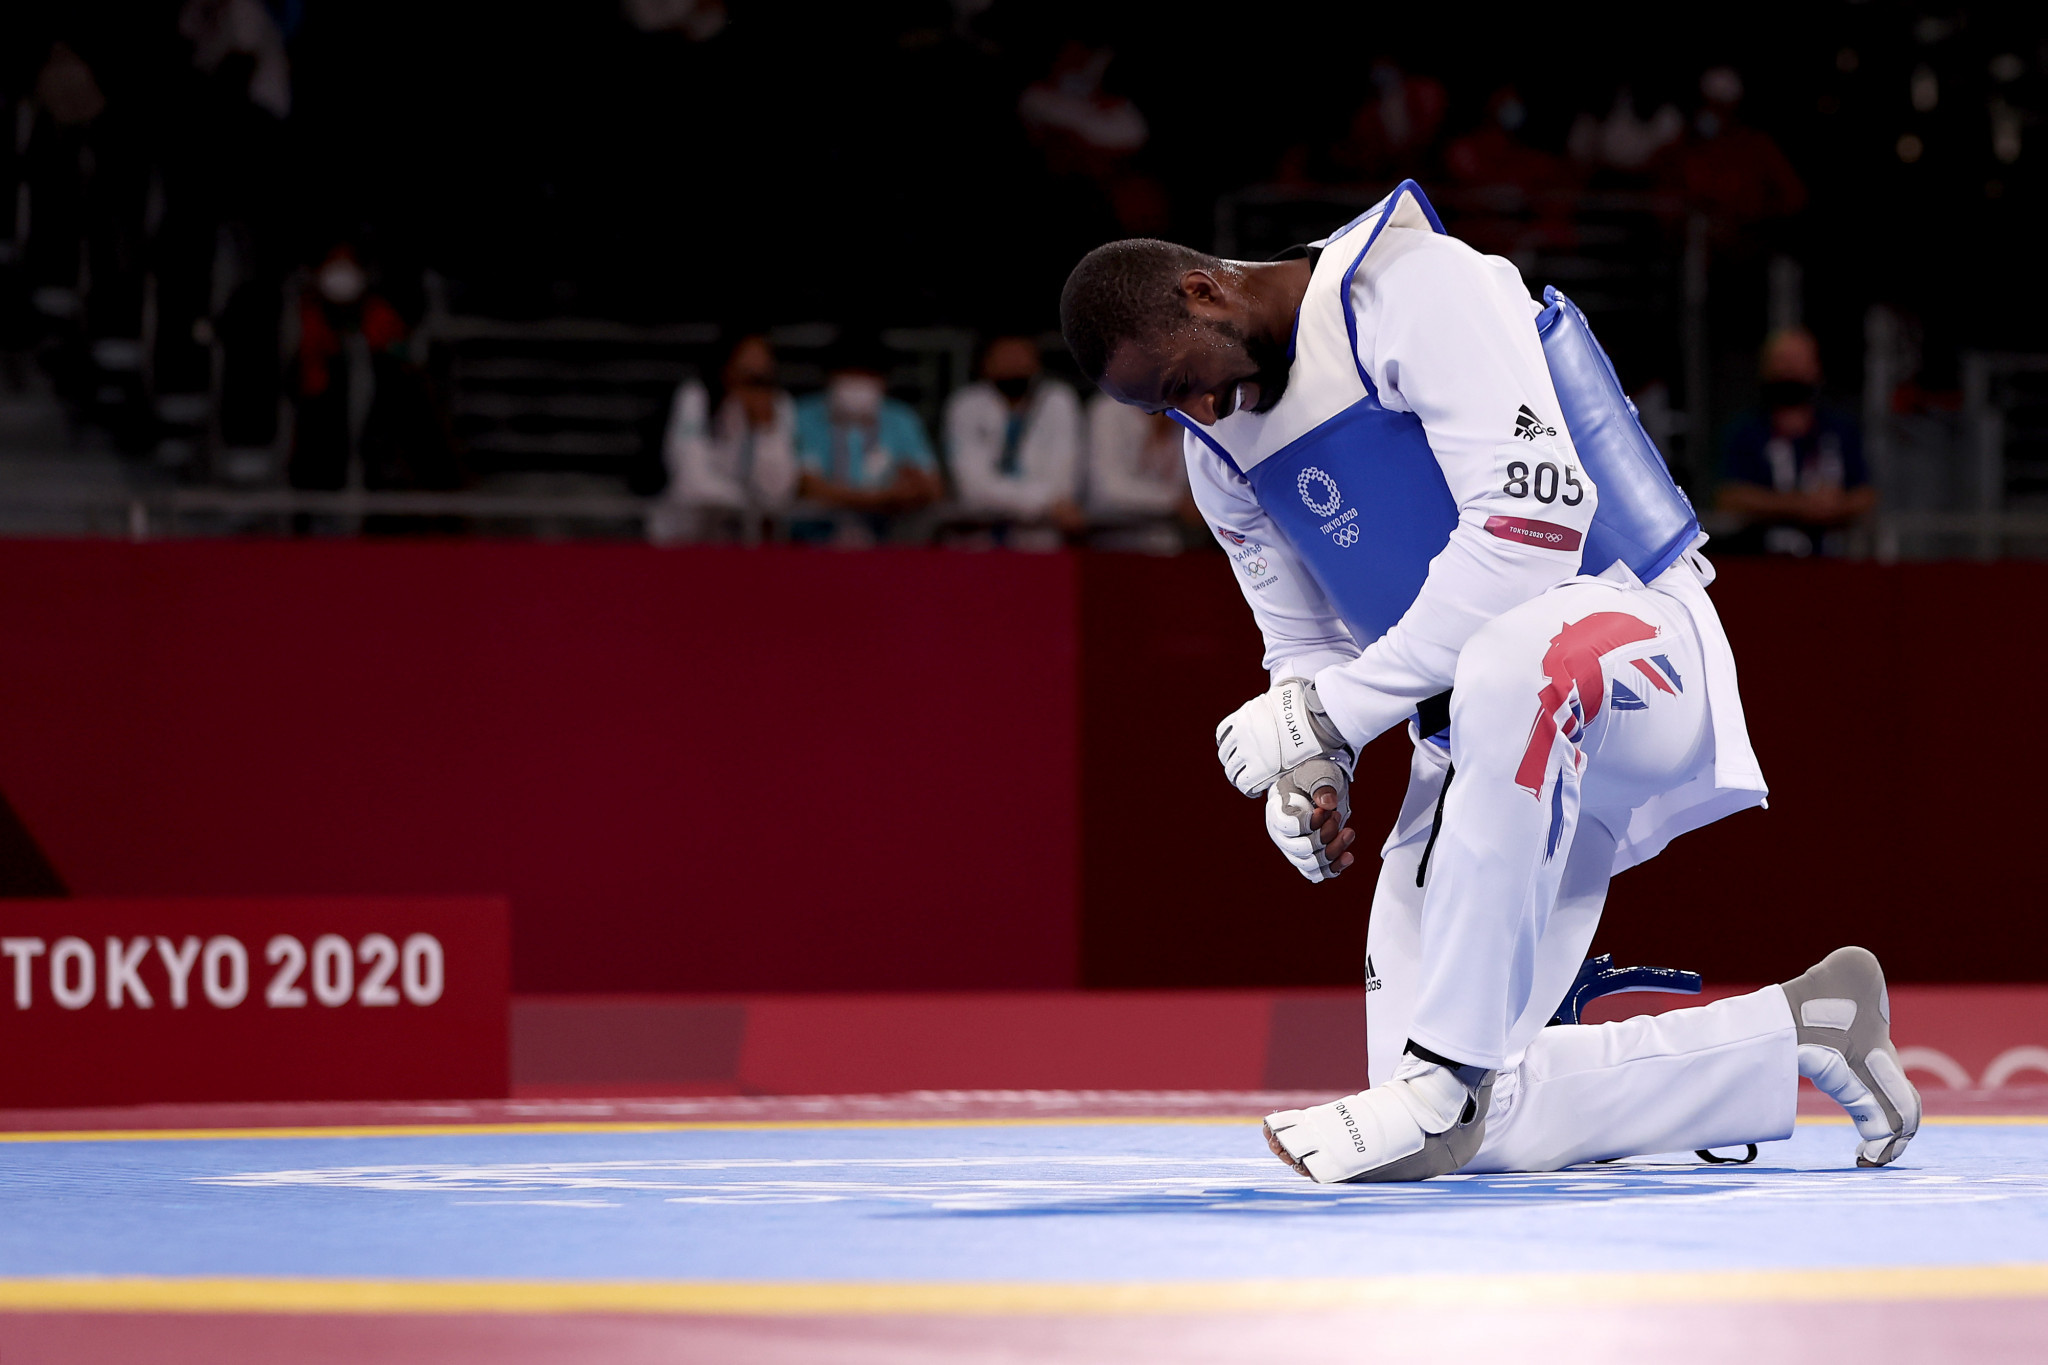 Mahama Cho last competed at the Tokyo 2020 Olympic Games ©Getty Images